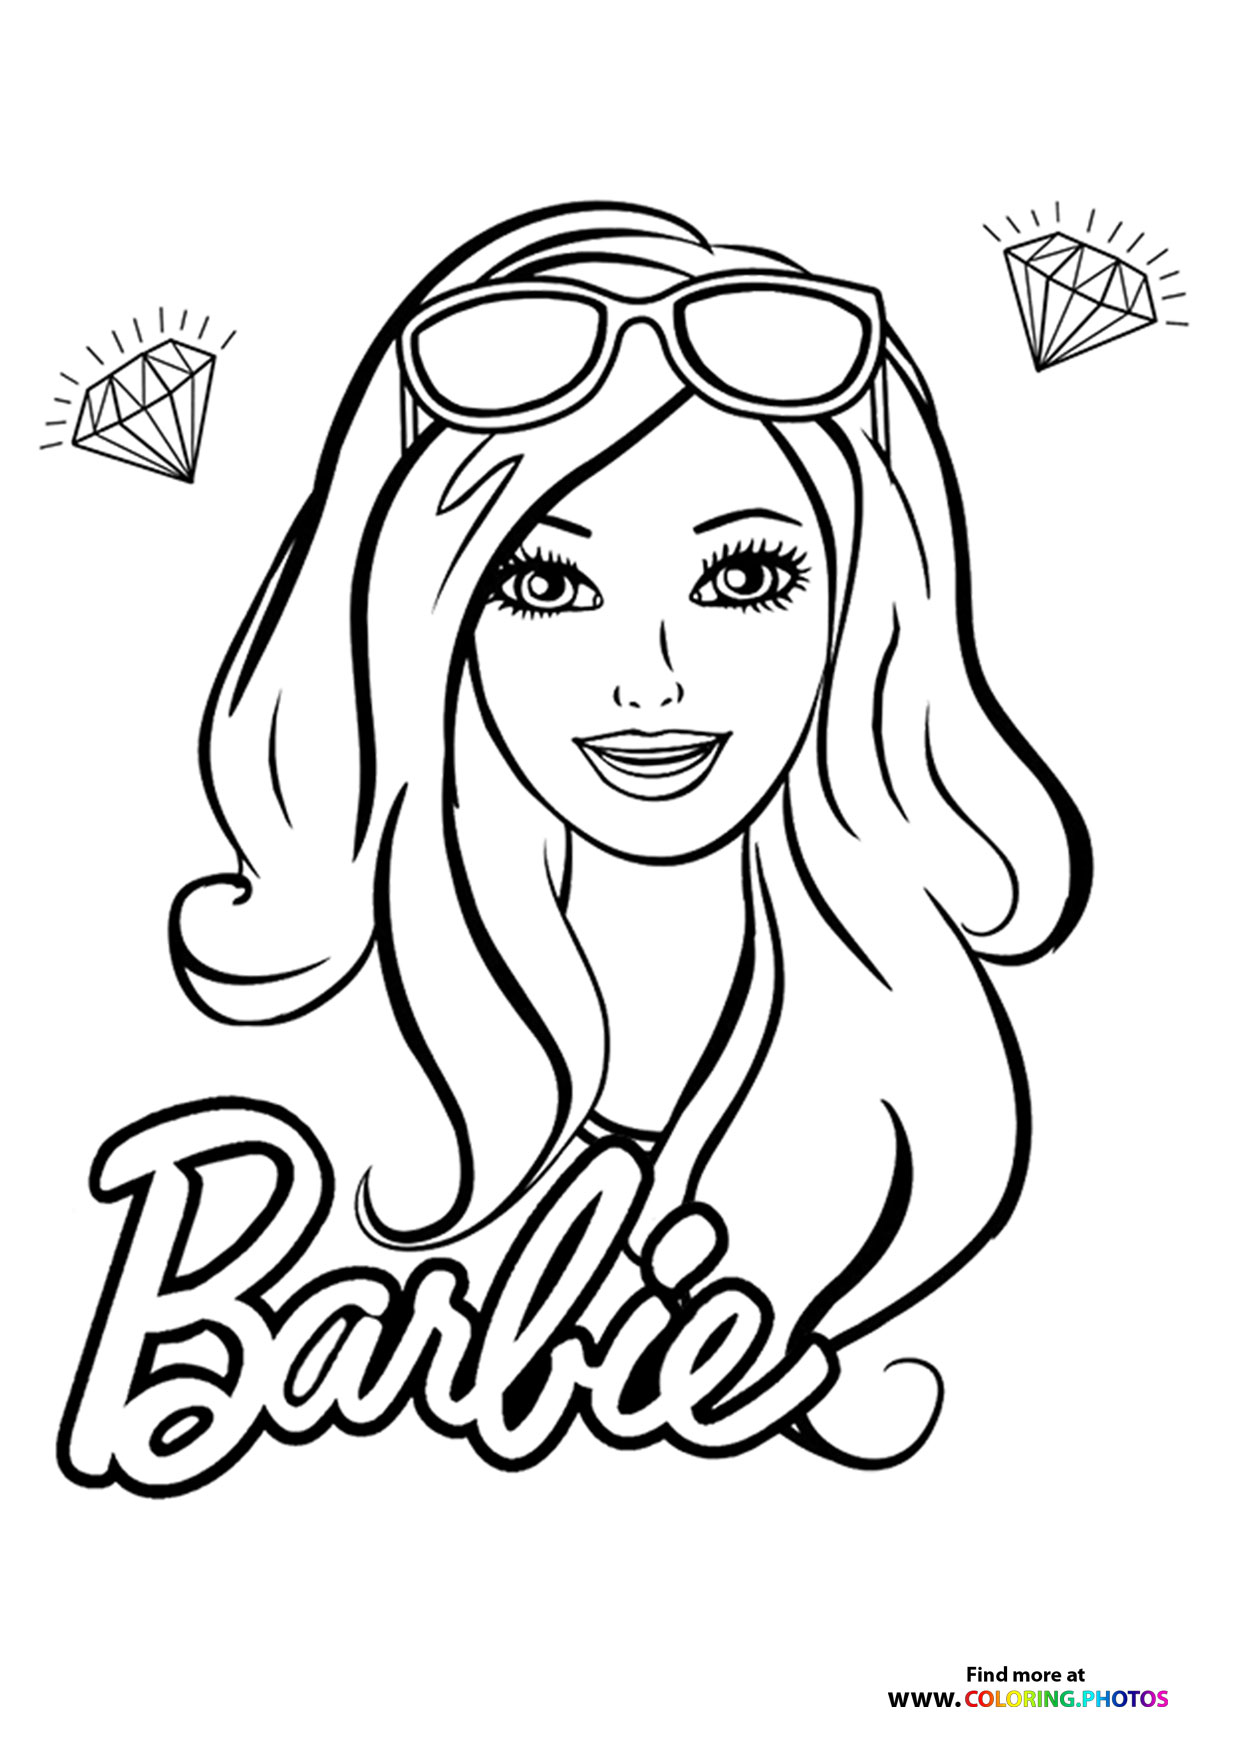 Barbie - Coloring Pages for kids | 100% free print or download